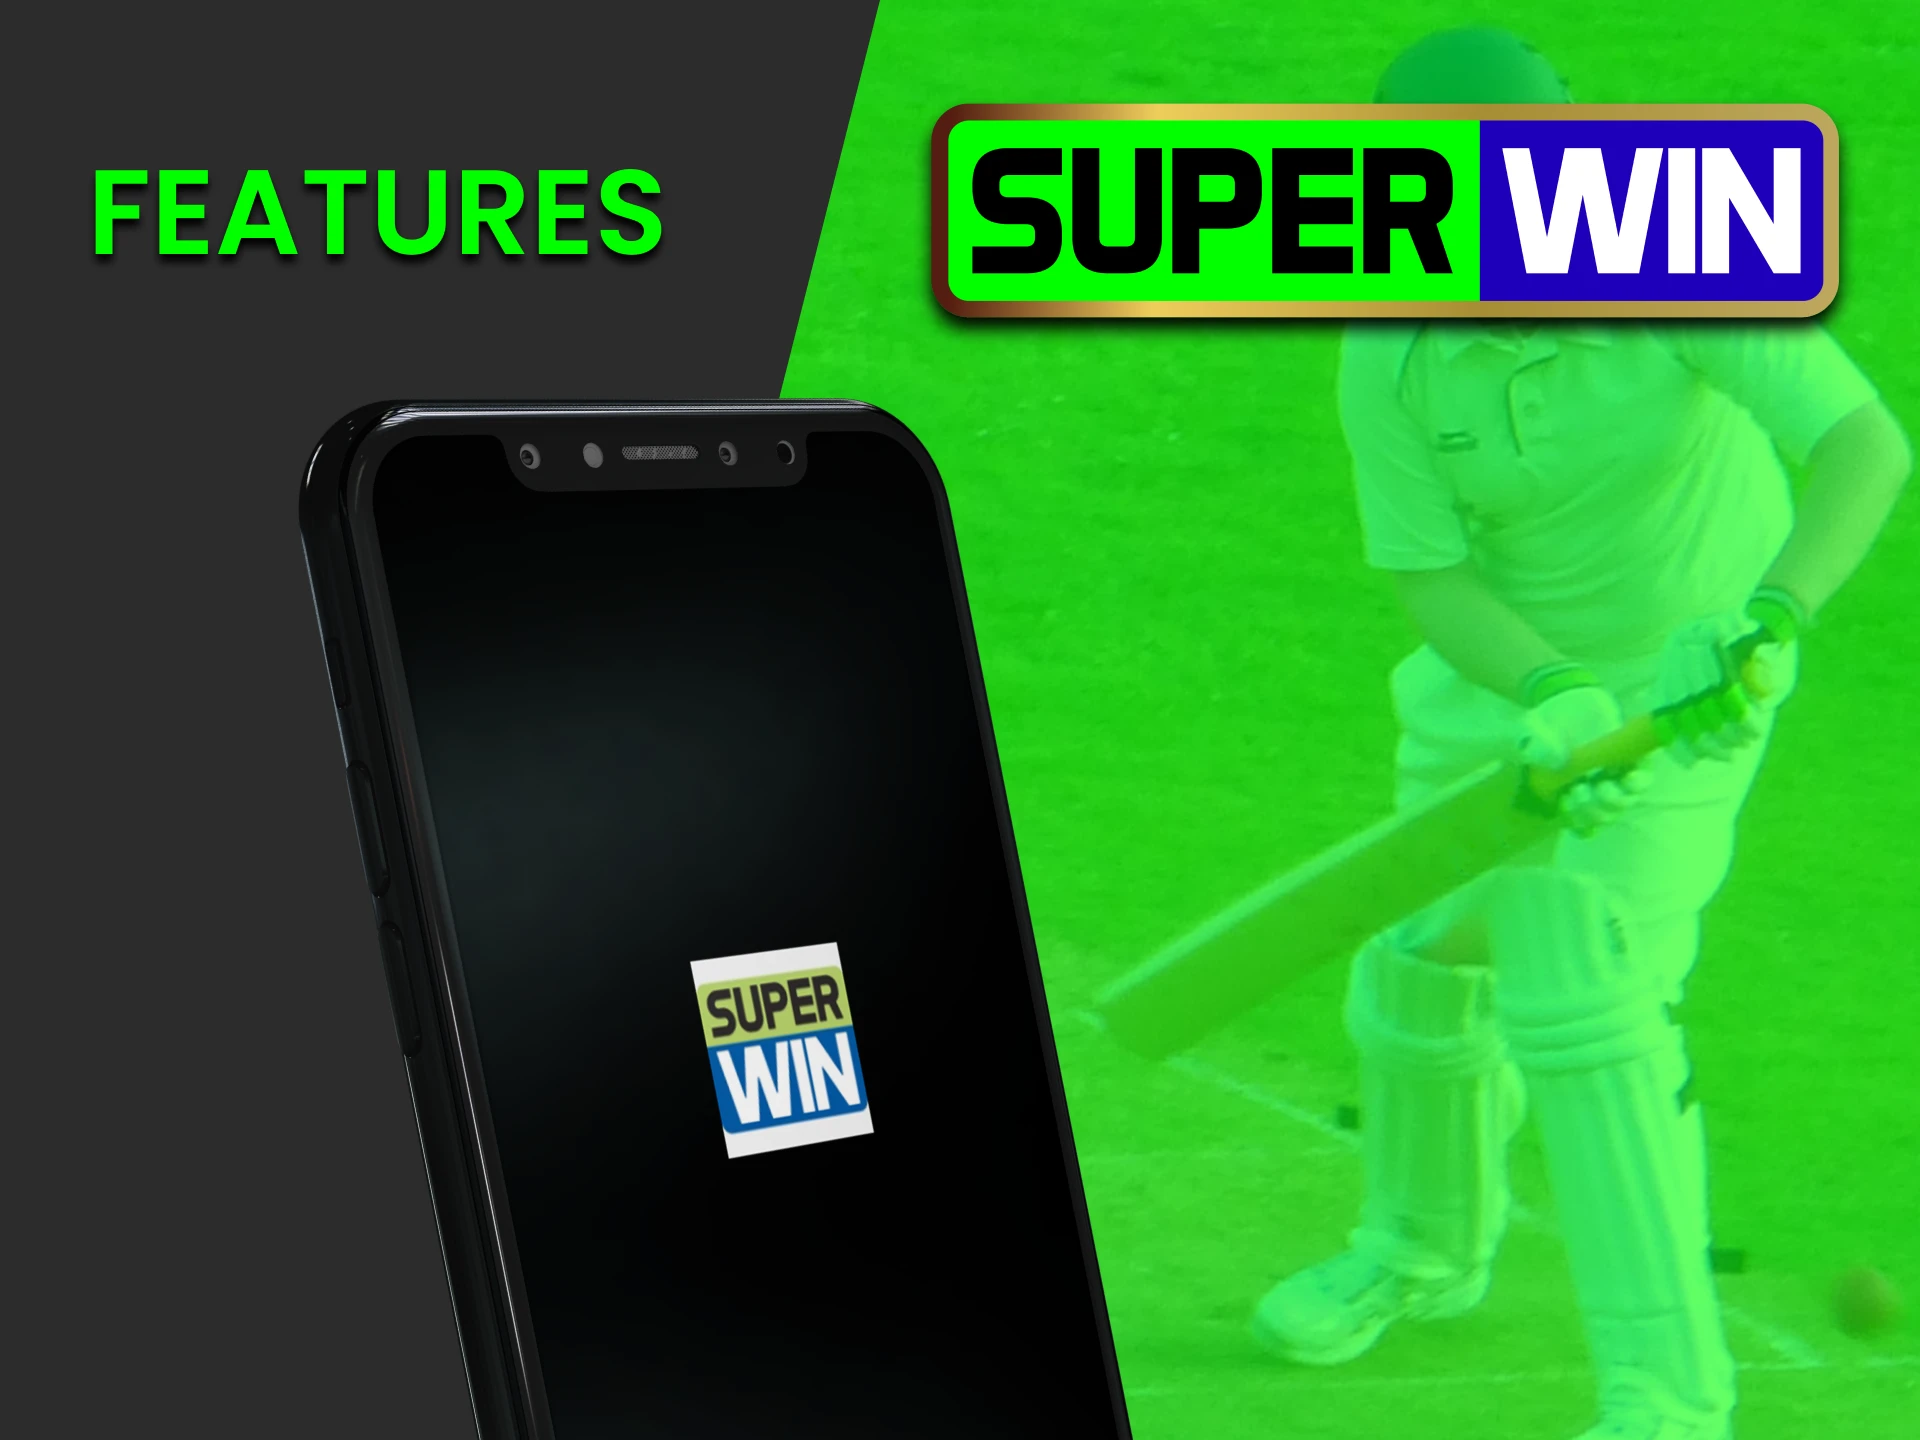 We will tell you what improvements await the Superwin application in the future.